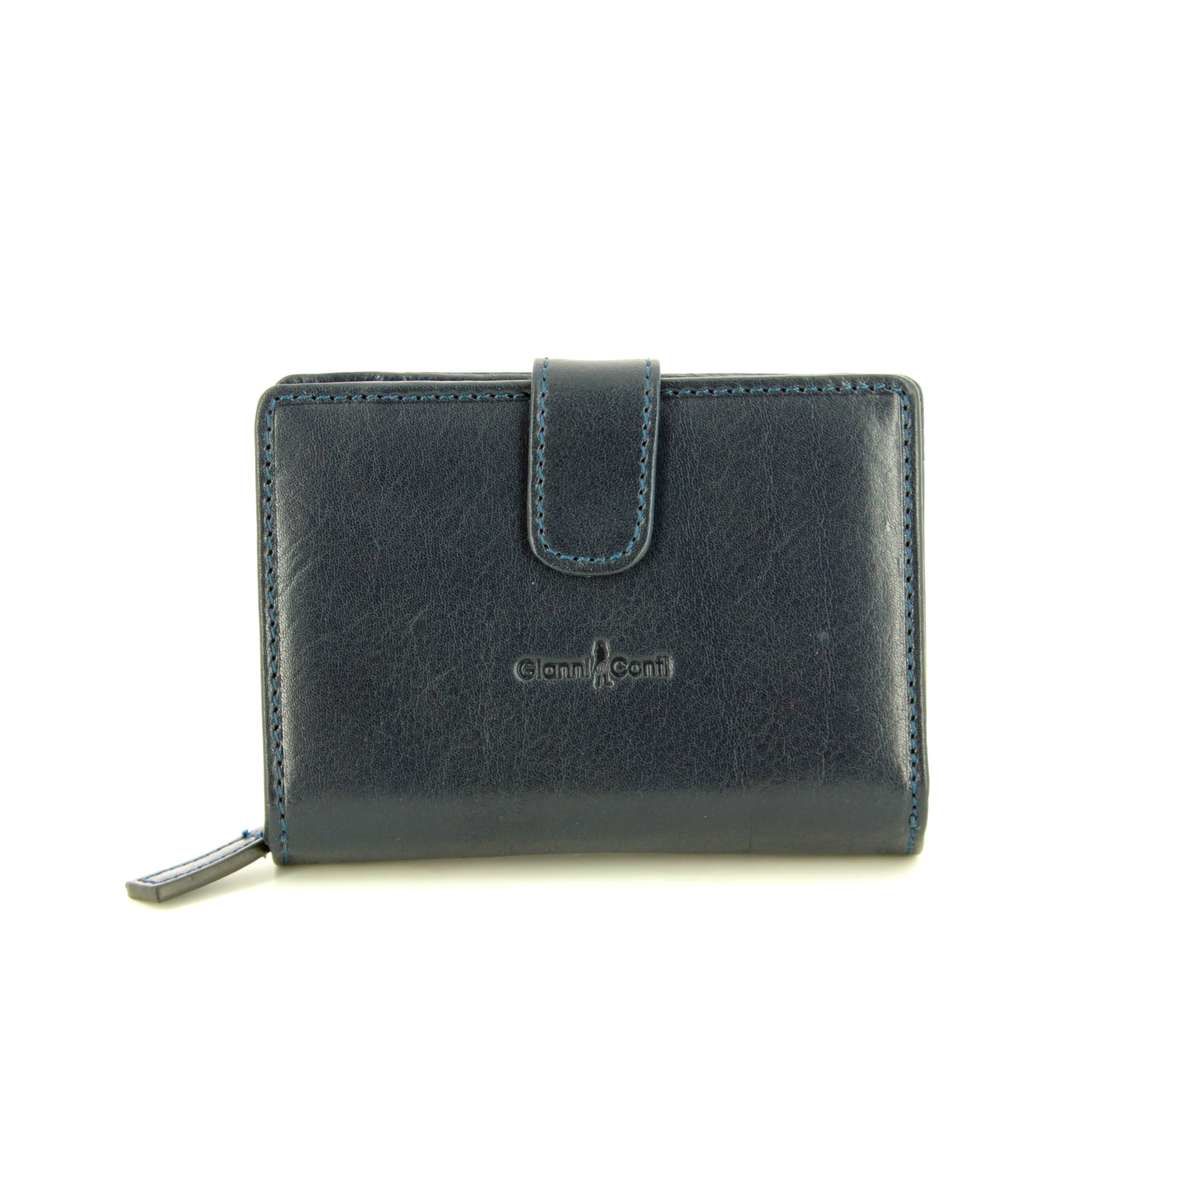 Gianni Conti Sena Bifold Purse Navy Leather Womens Purse 9408086-43 In Size 2 In Plain Navy Leather